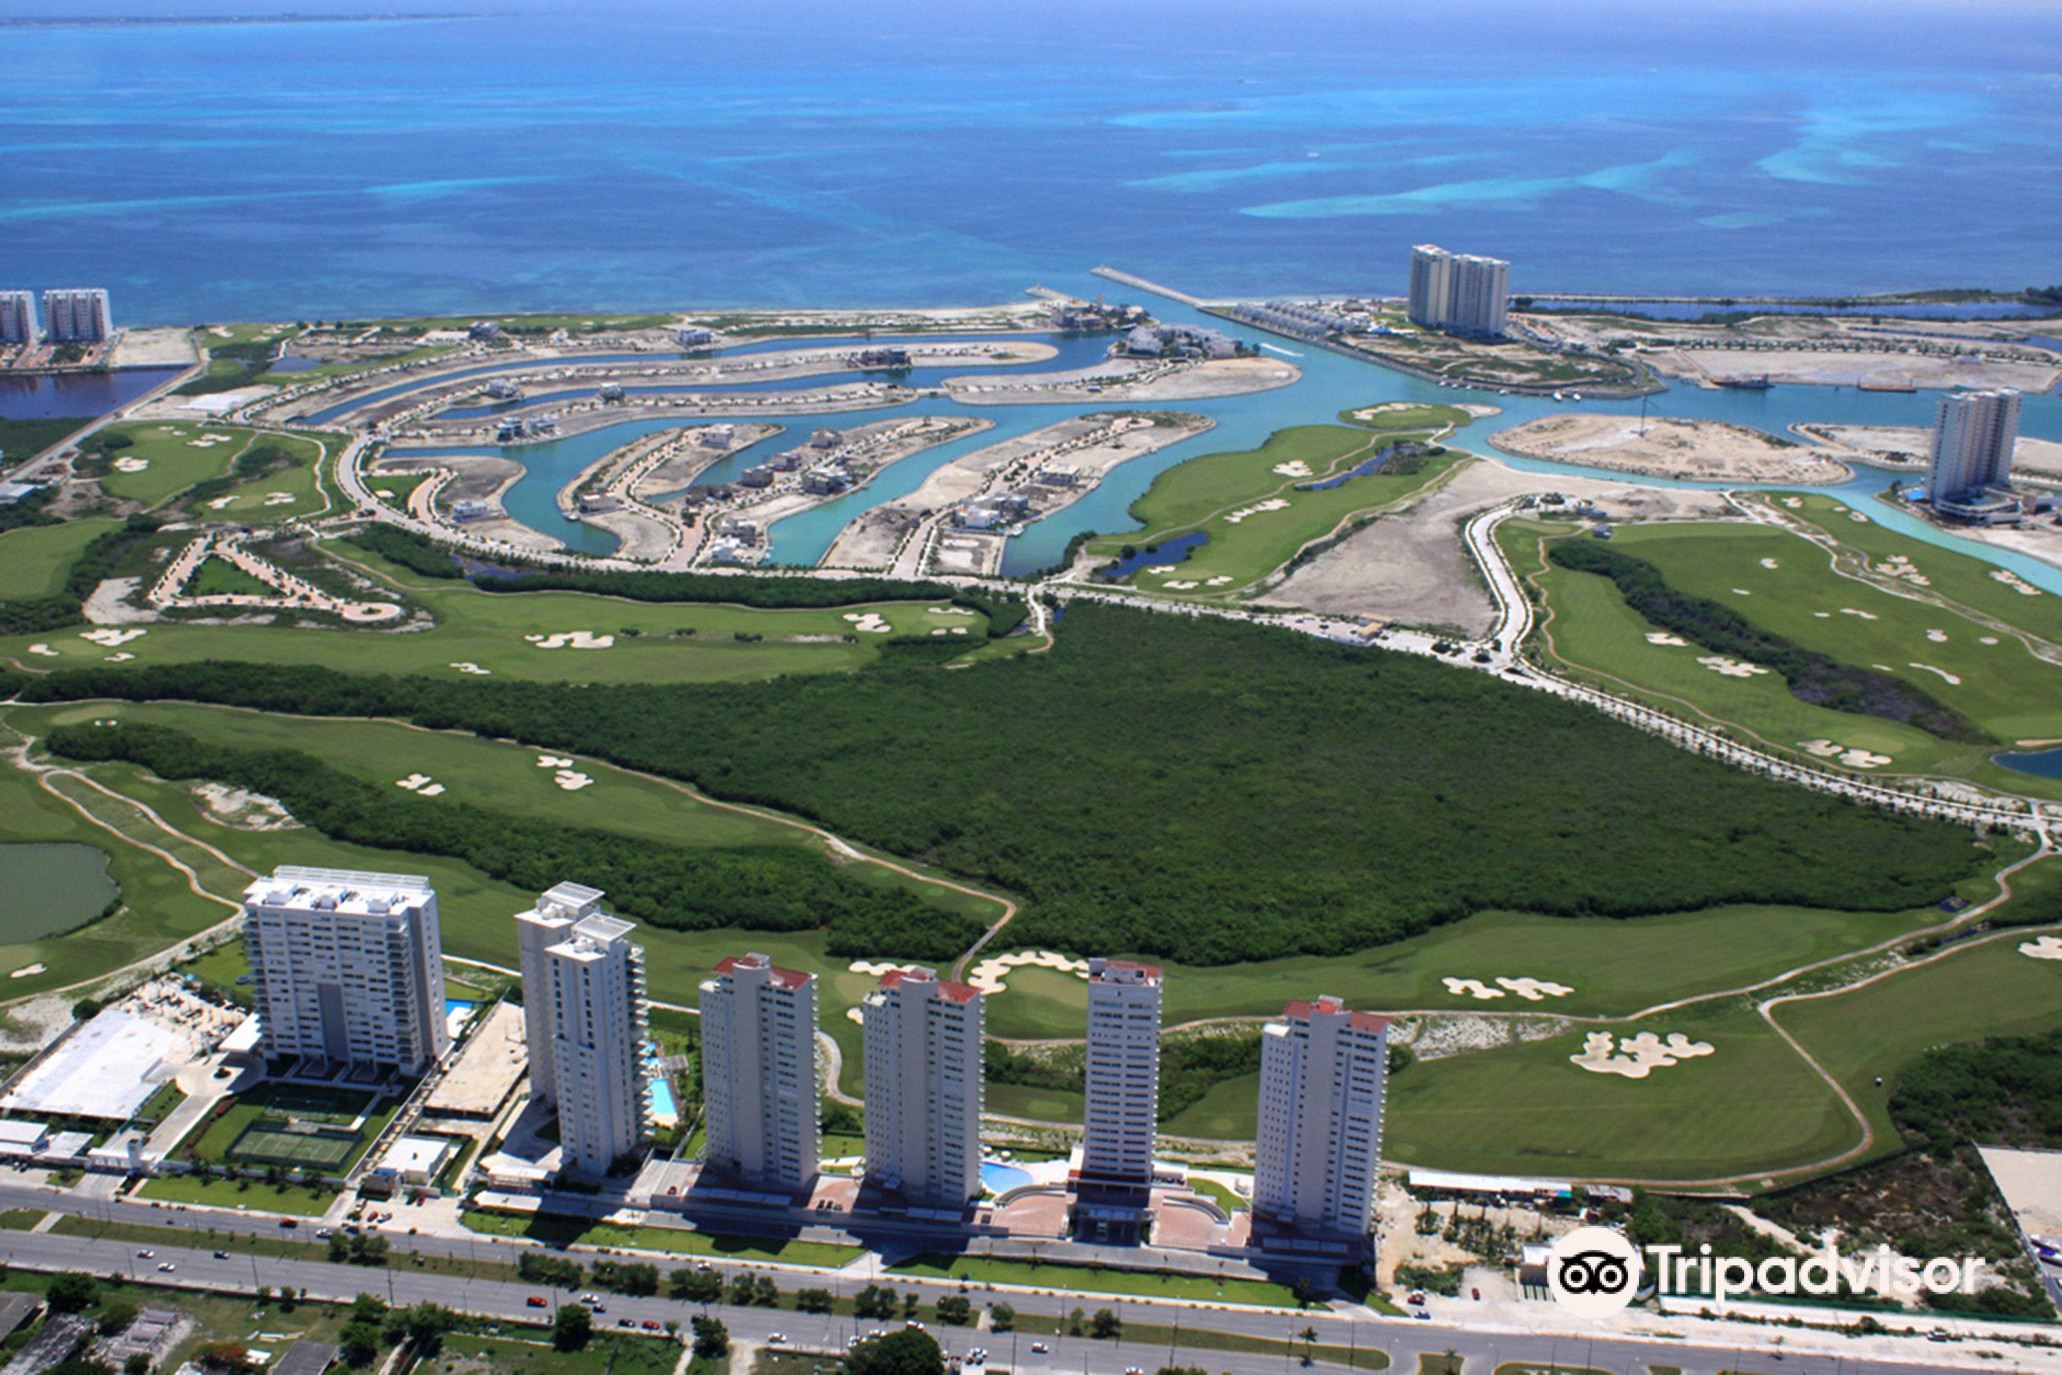 Top 6 Golf Courses in Cancun - 2023